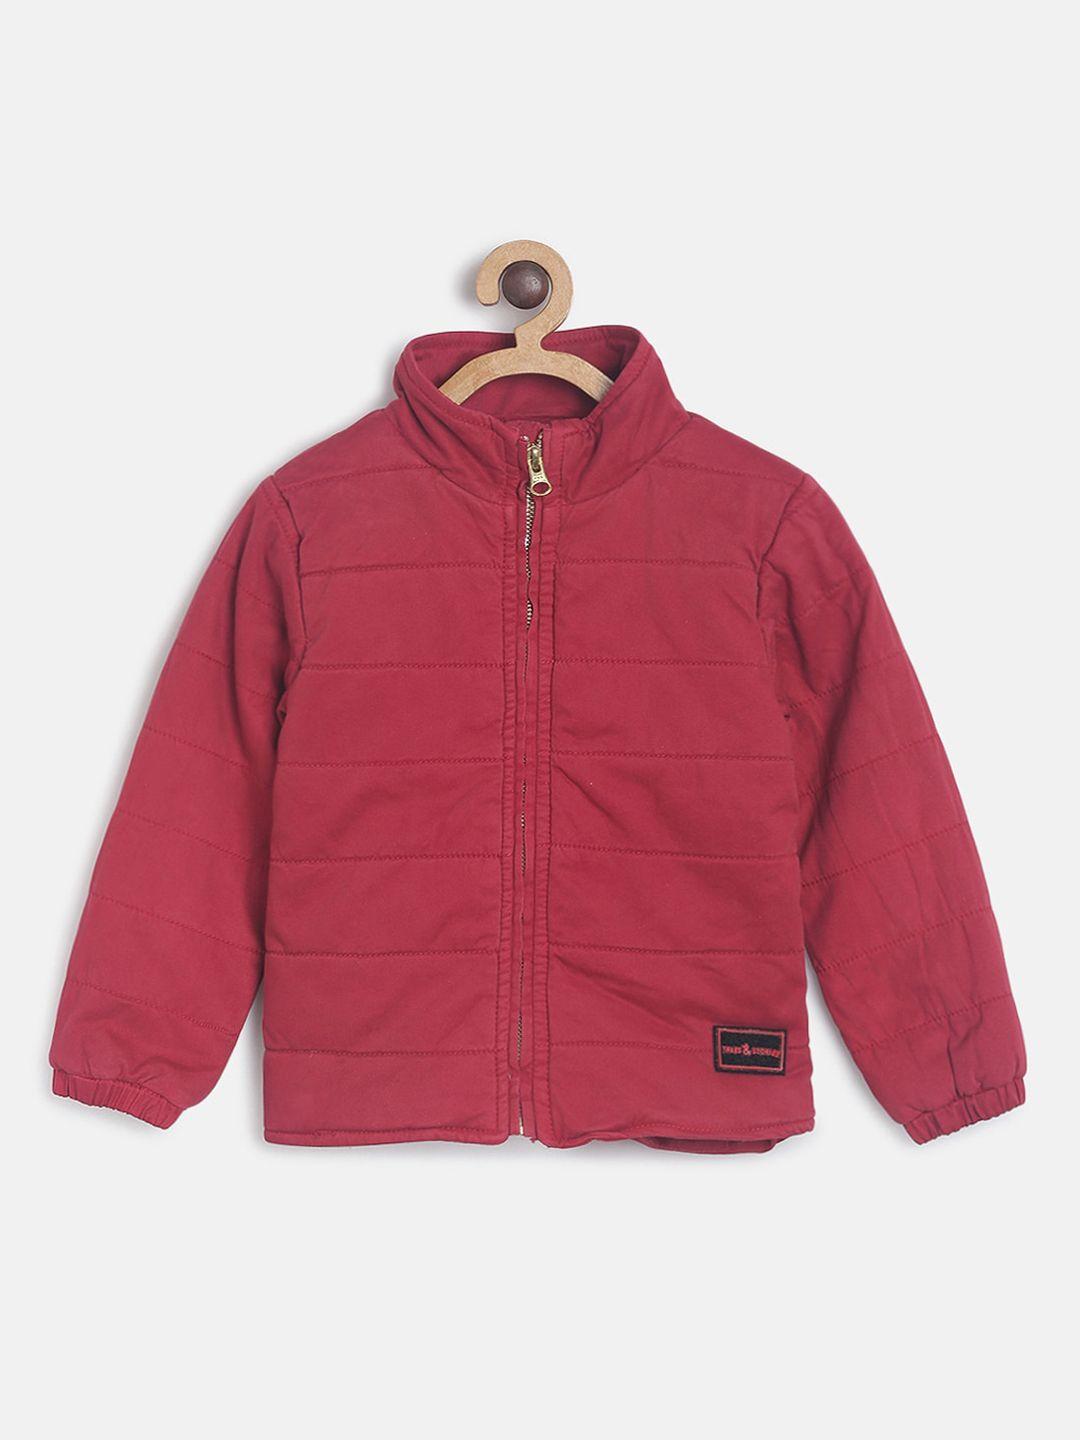 tales-&-stories-boys-red-solid-padded-jacket